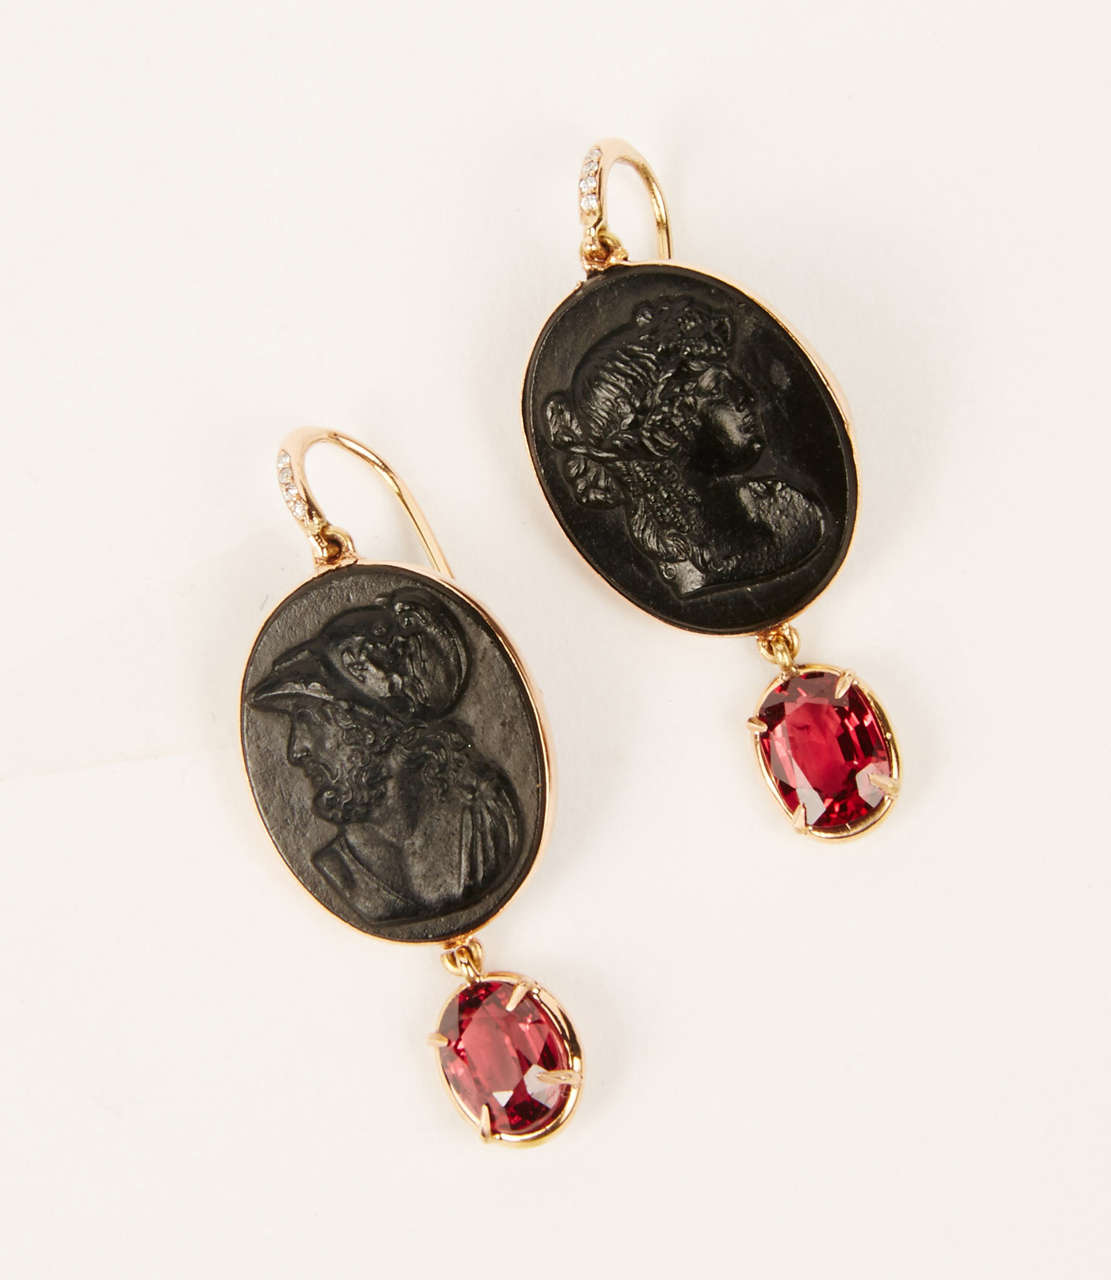 Women's Earrings with Antique Black Cameos and Spinels